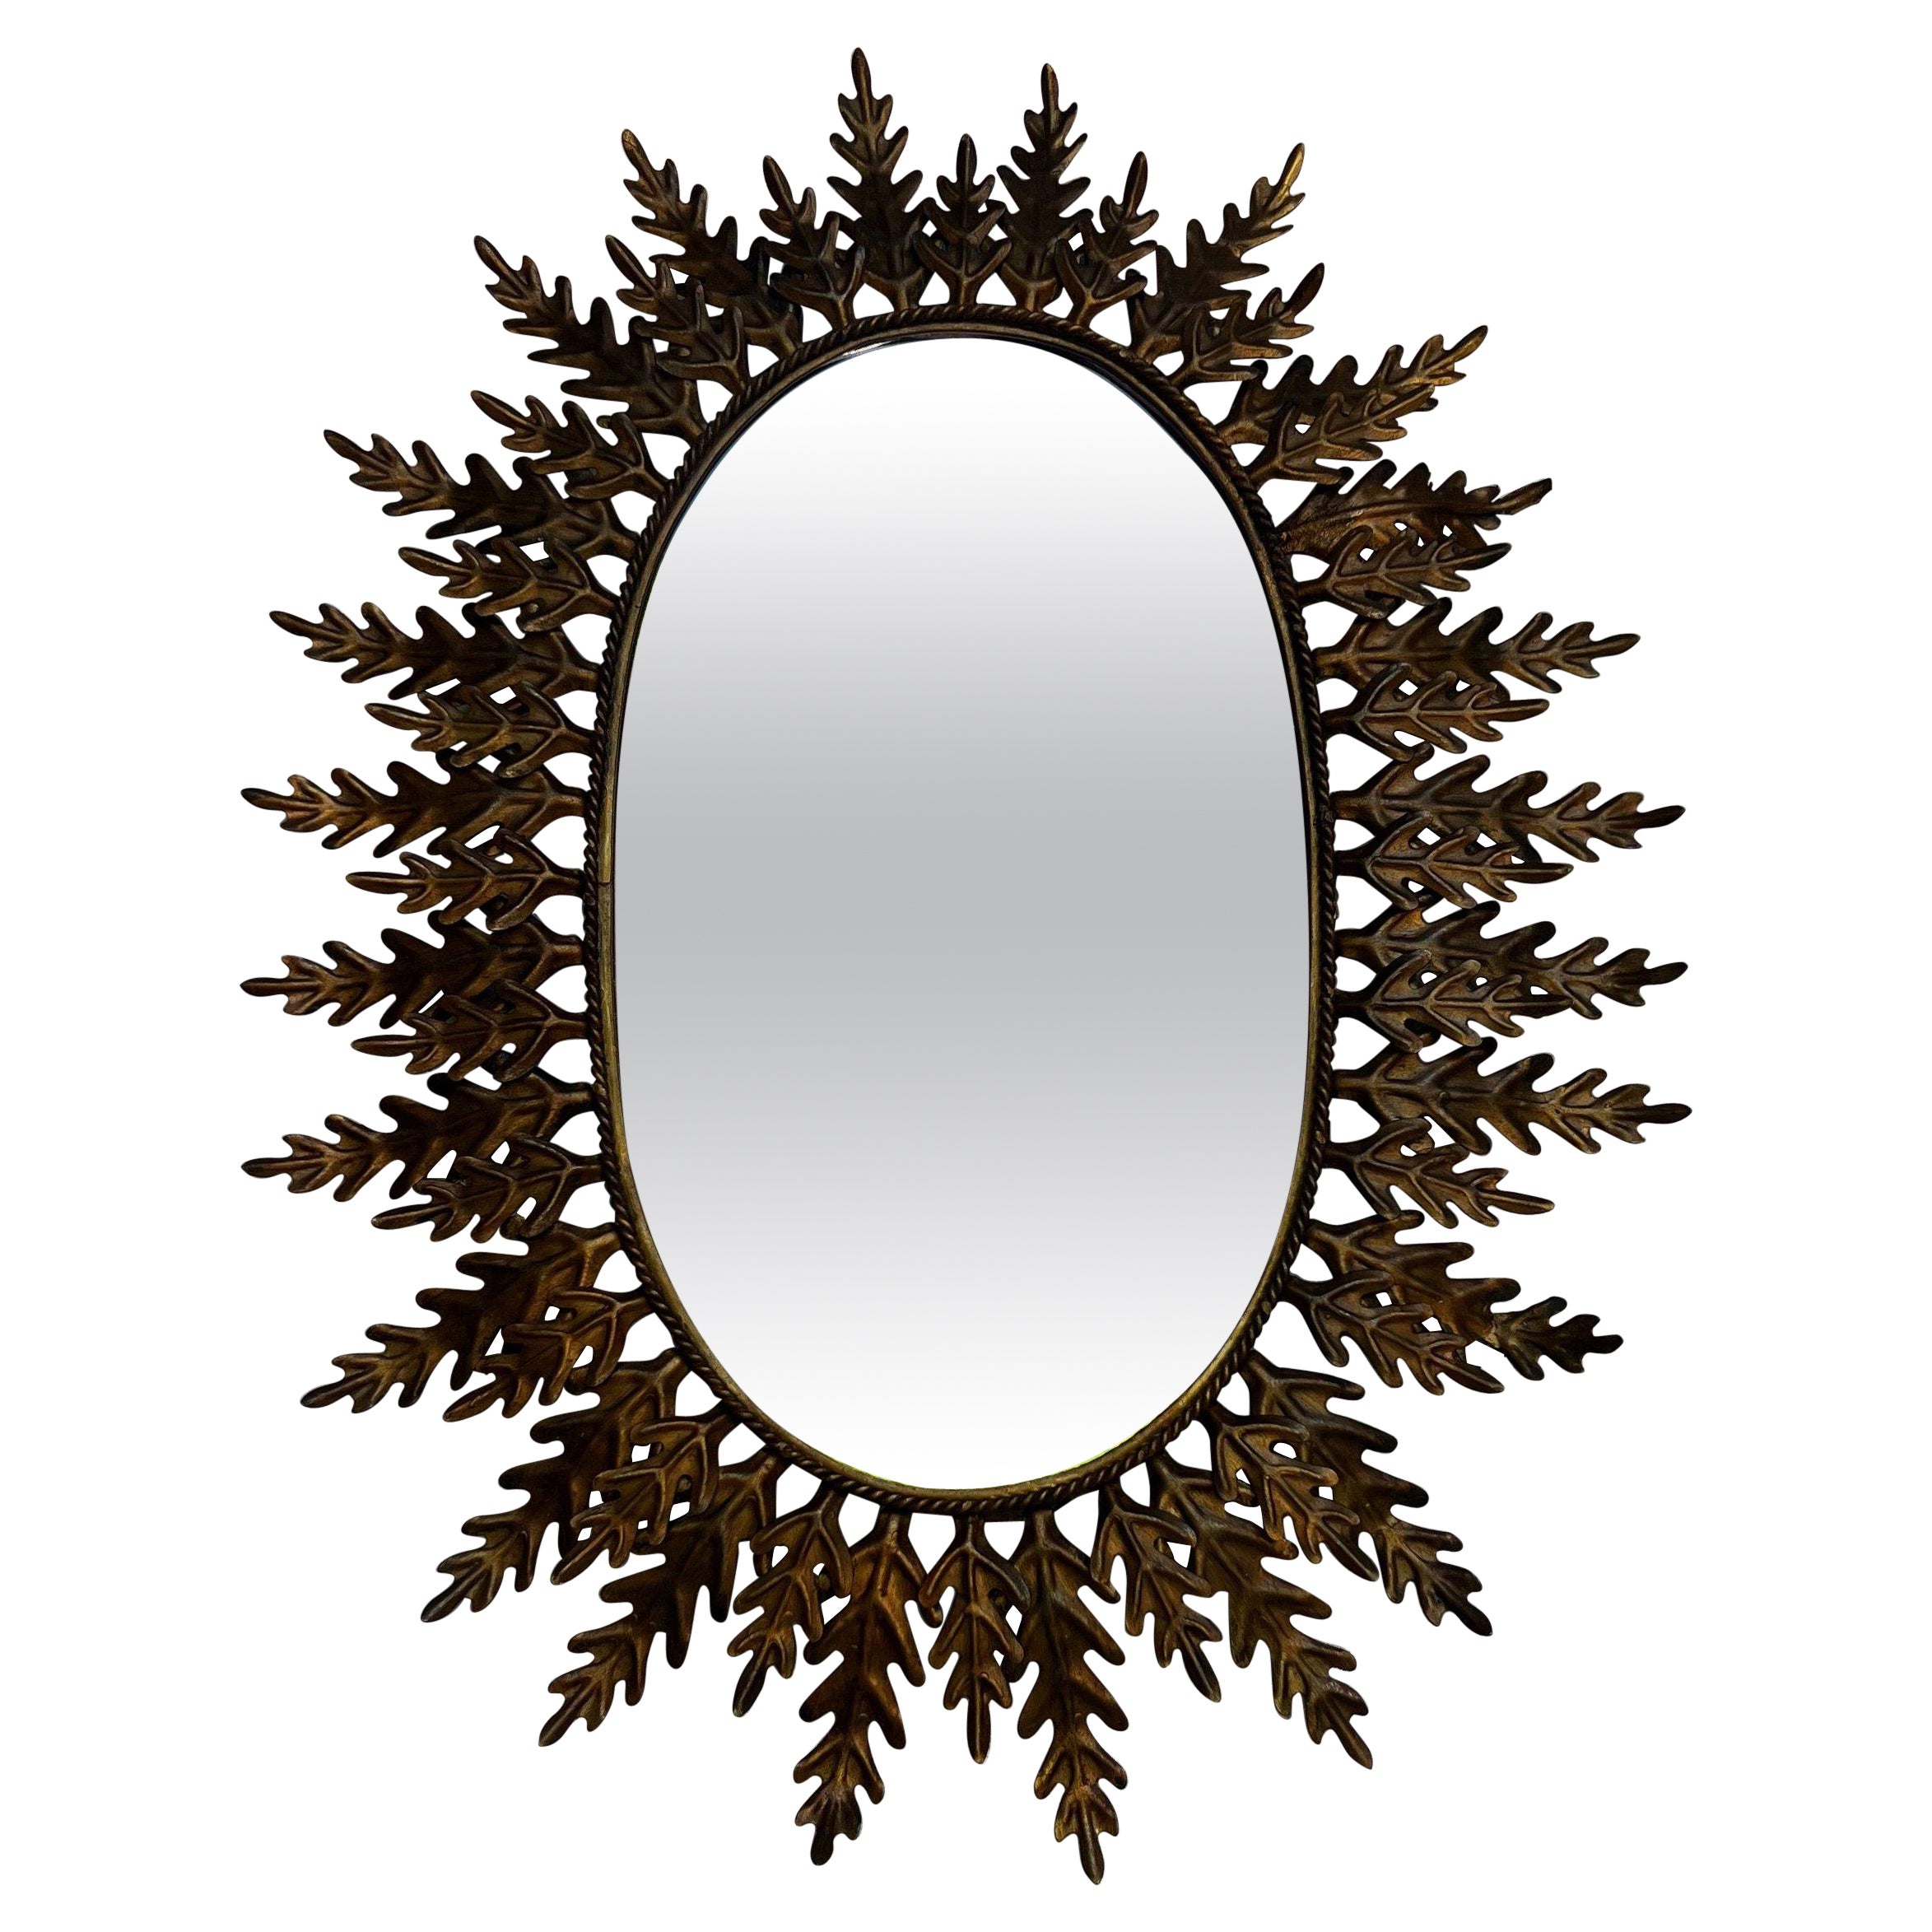 Oval Sunburst Mirror with Alternating Leaves For Sale